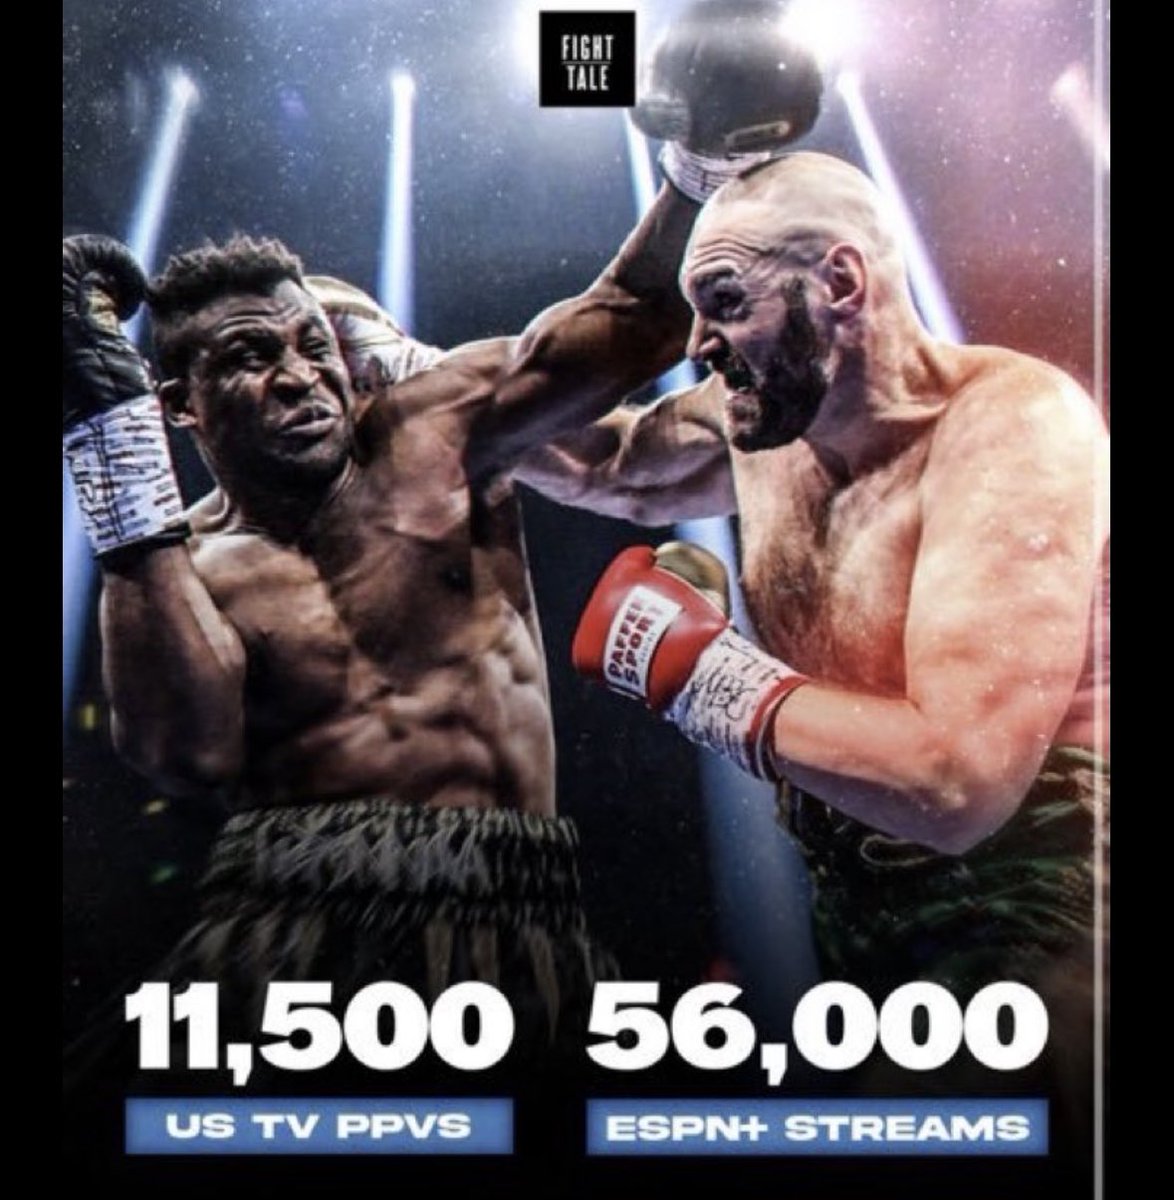 The worst UFC PPV of all time still out sold Tyson Fury vs Francis Ngannou 😭 

You can’t make this up, 70K PPV is insane 😭😭